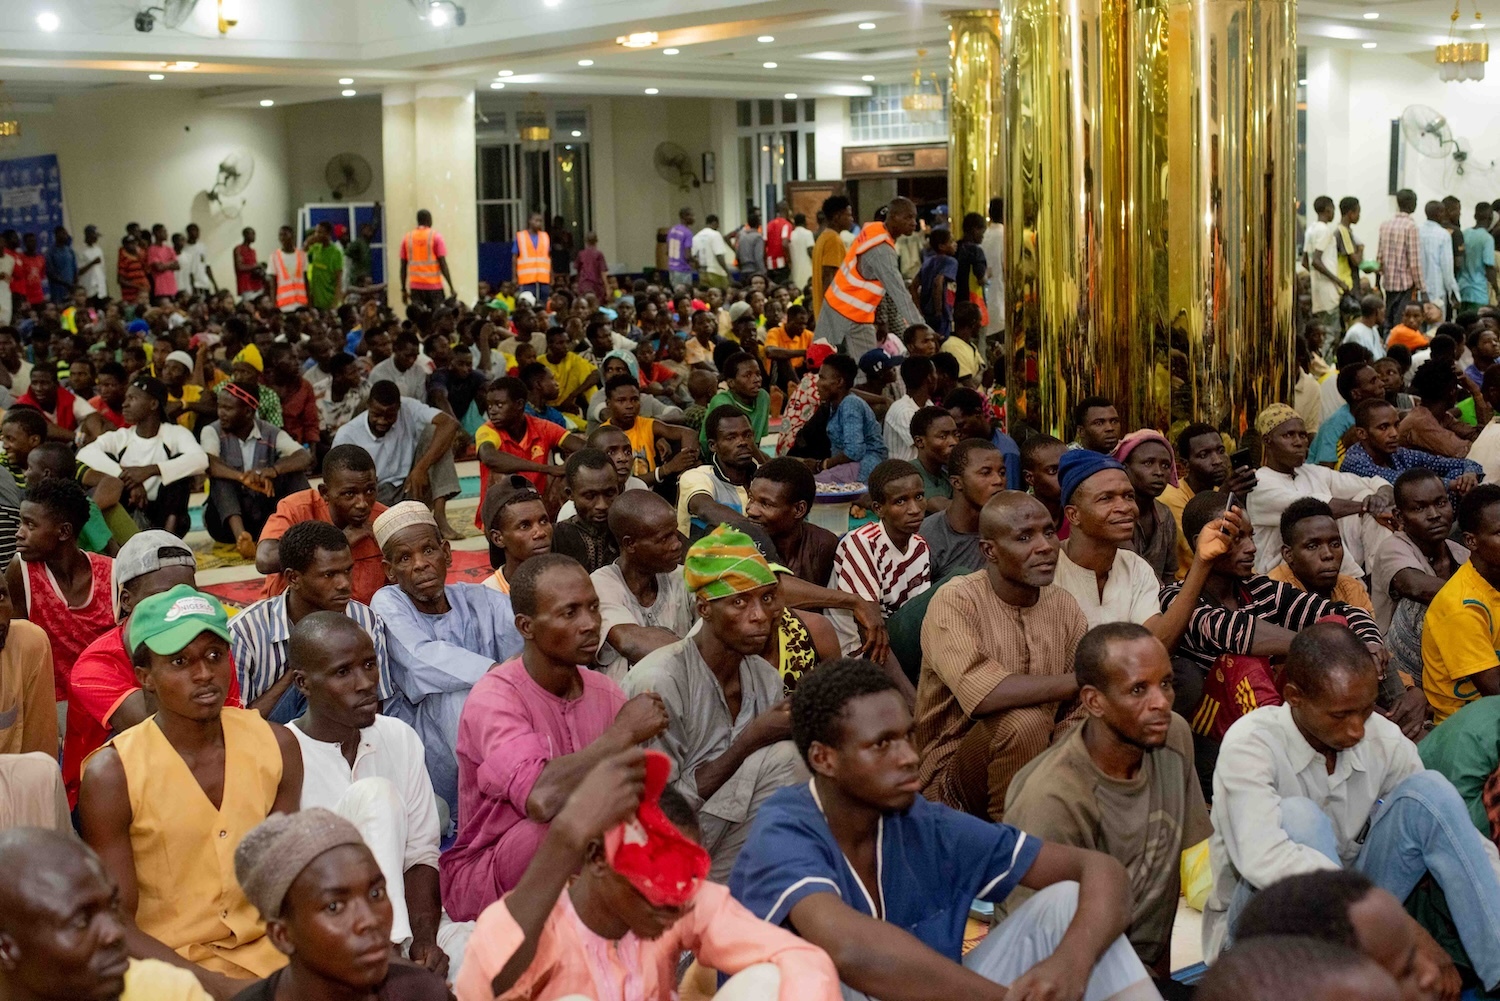 A crowded hall in Nigeria with many seated people, some wearing traditional and reflective vests, attending an event, focusing attentively forward.